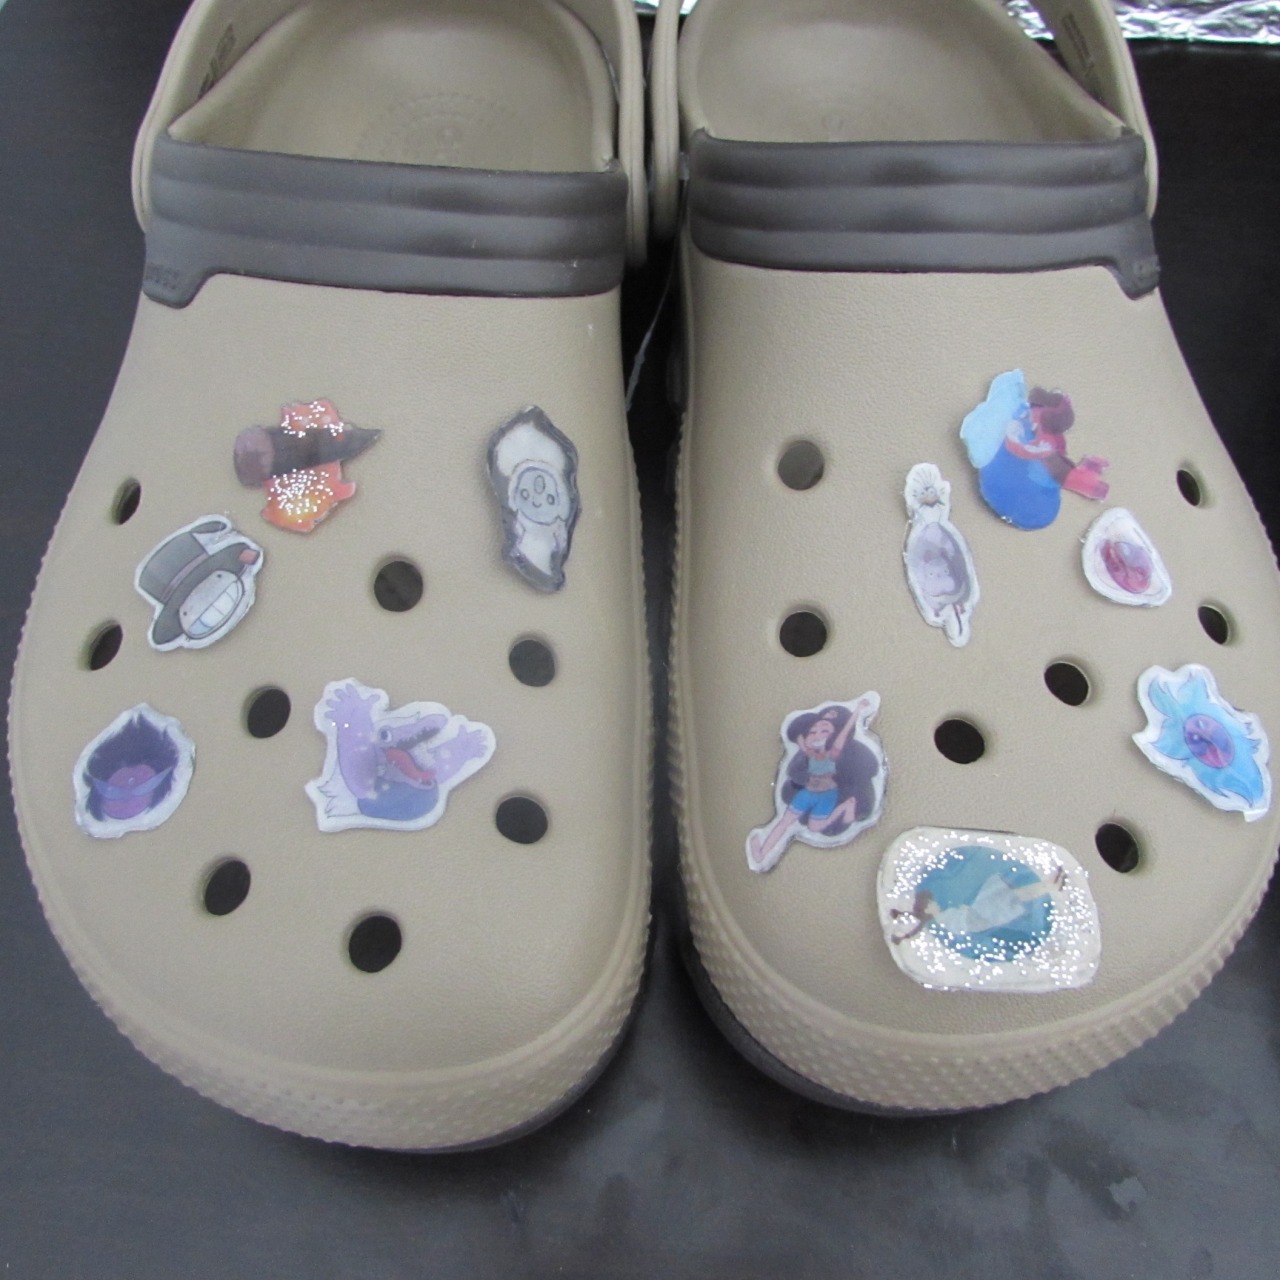 the things you put in crocs